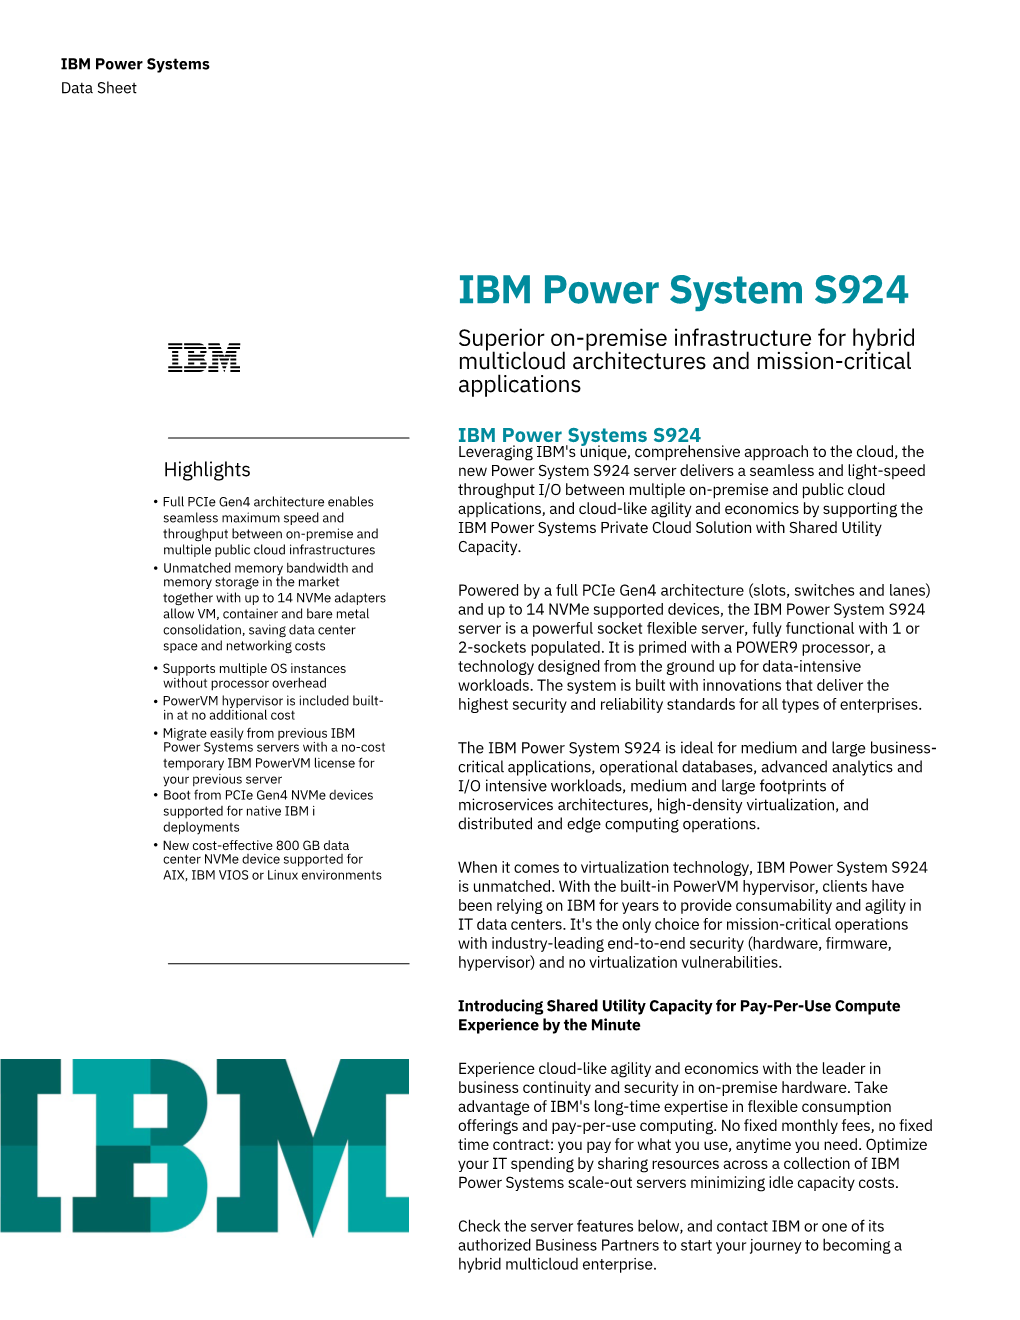 IBM Power System S924 Superior On-Premise Infrastructure for Hybrid Multicloud Architectures and Mission-Critical Applications